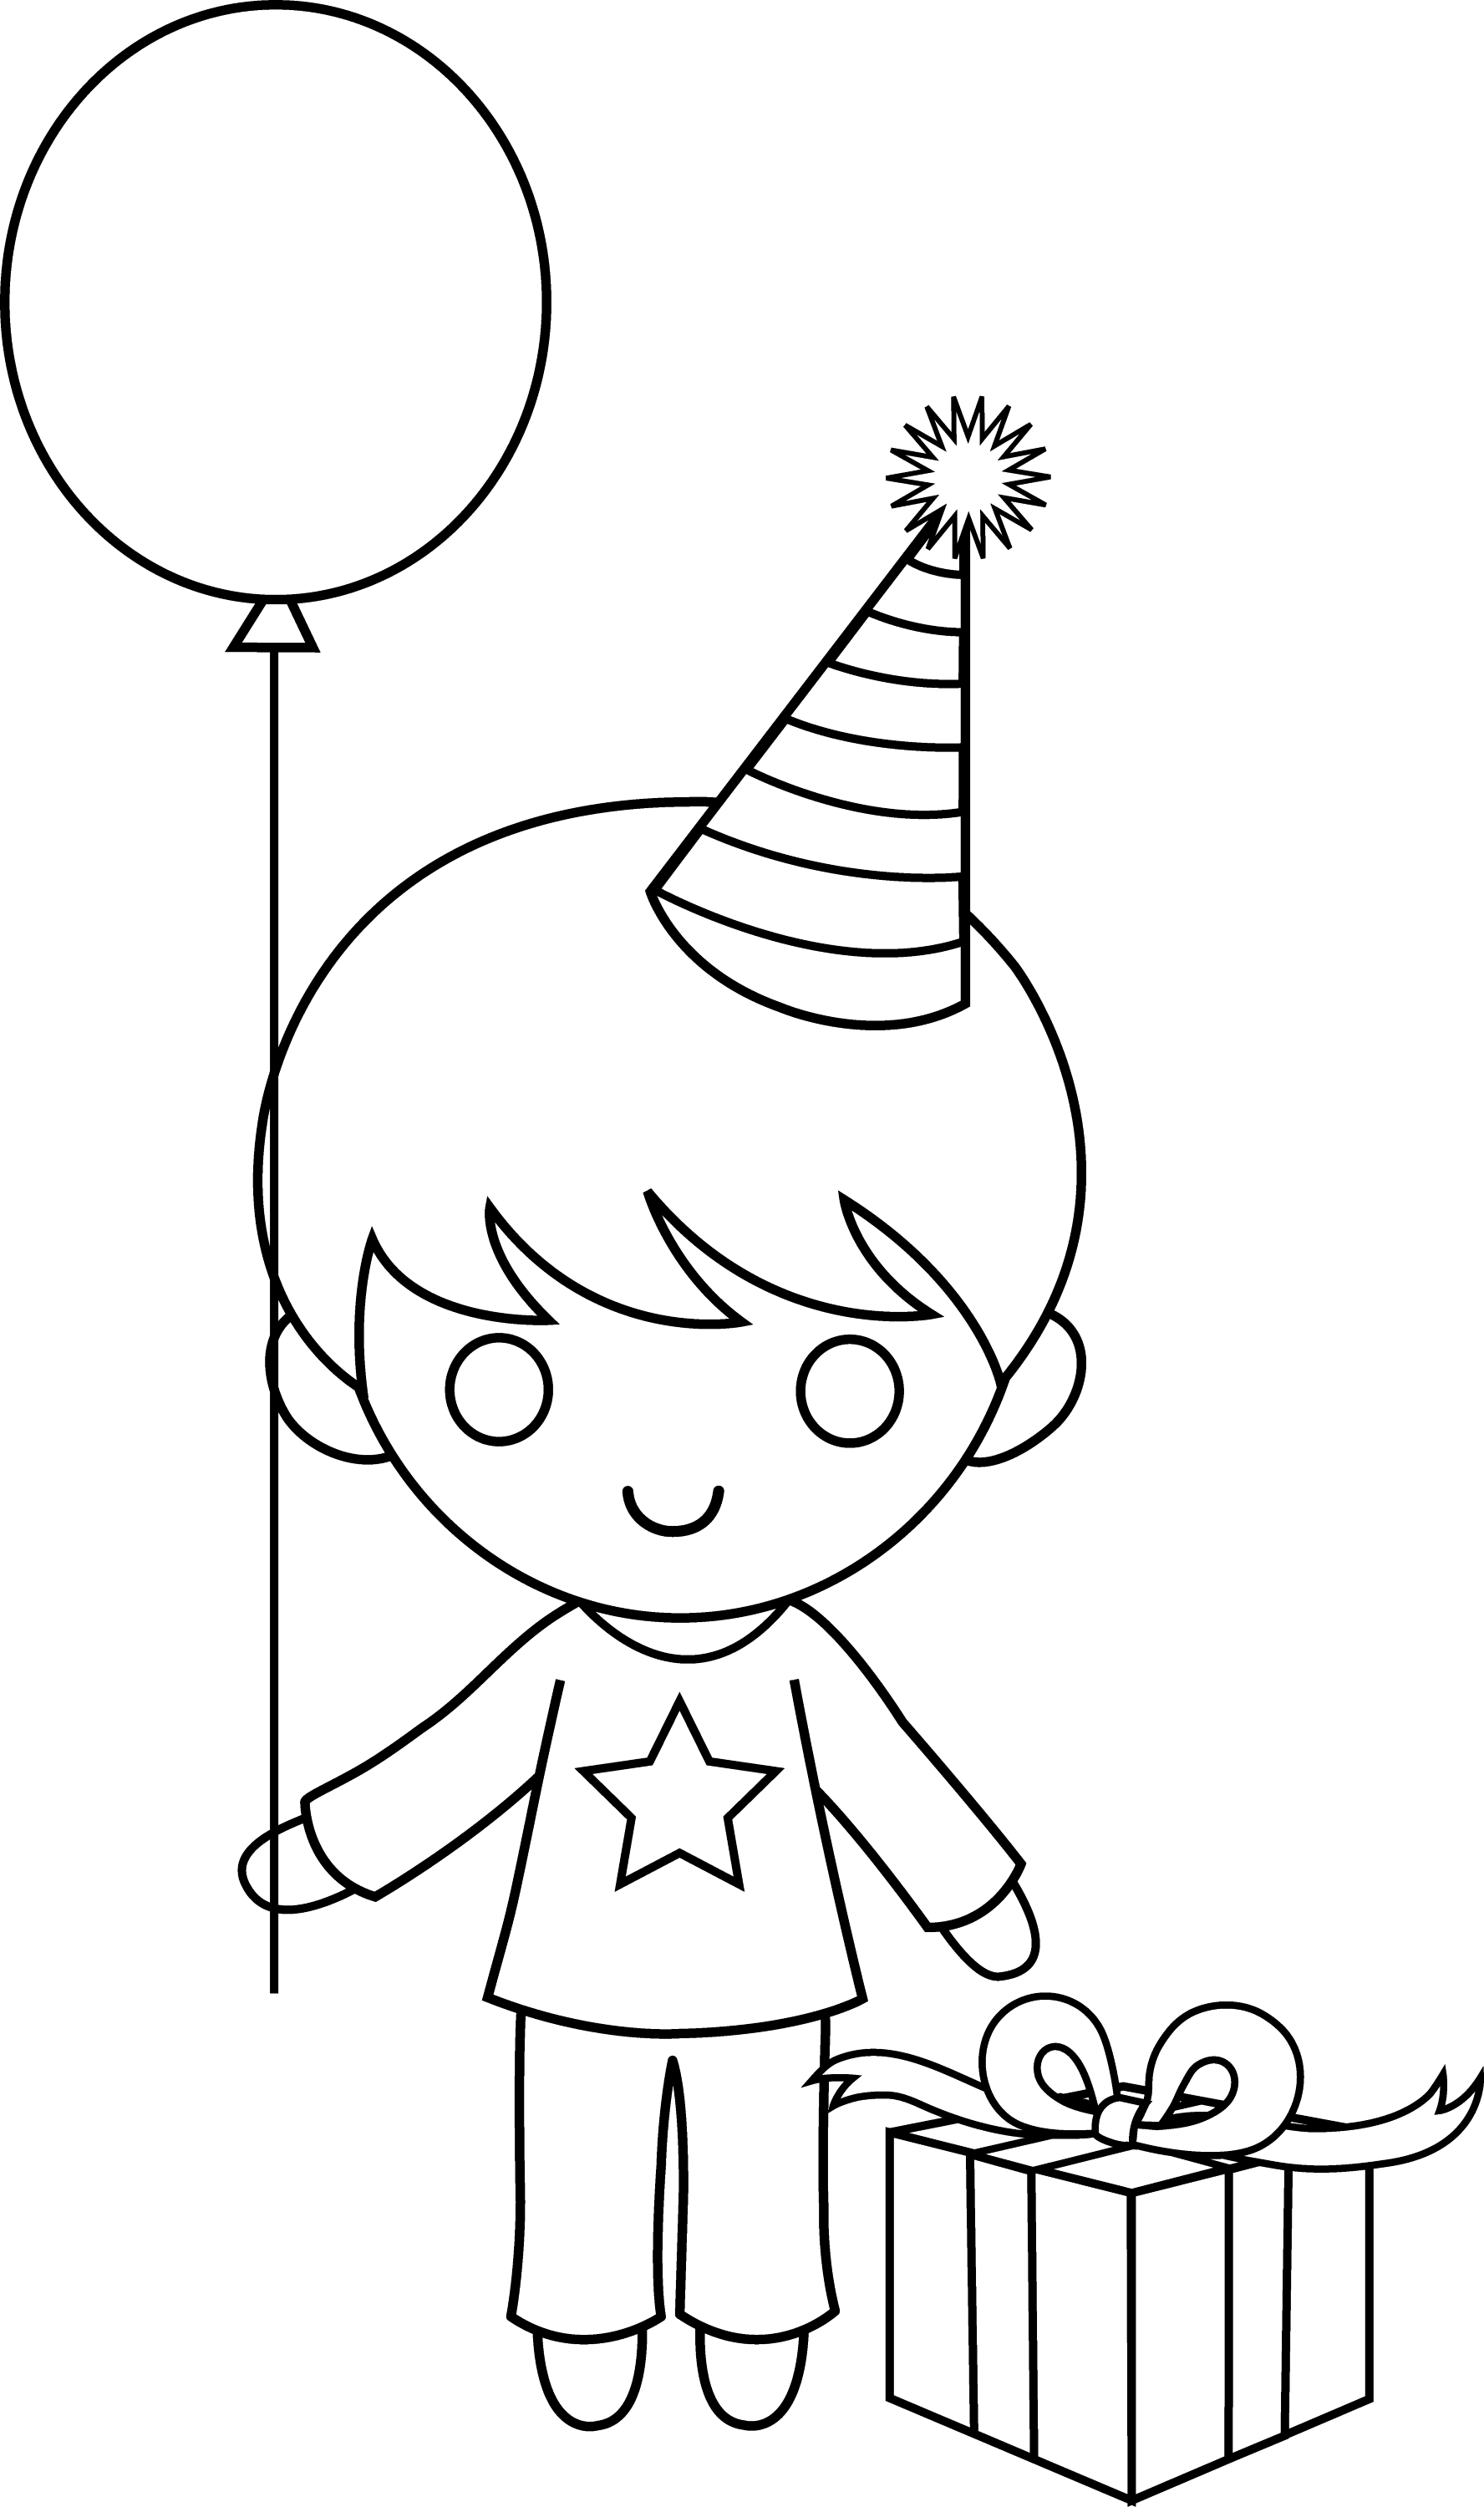 Download Birthday Boy Coloring Page - Free Clip Art